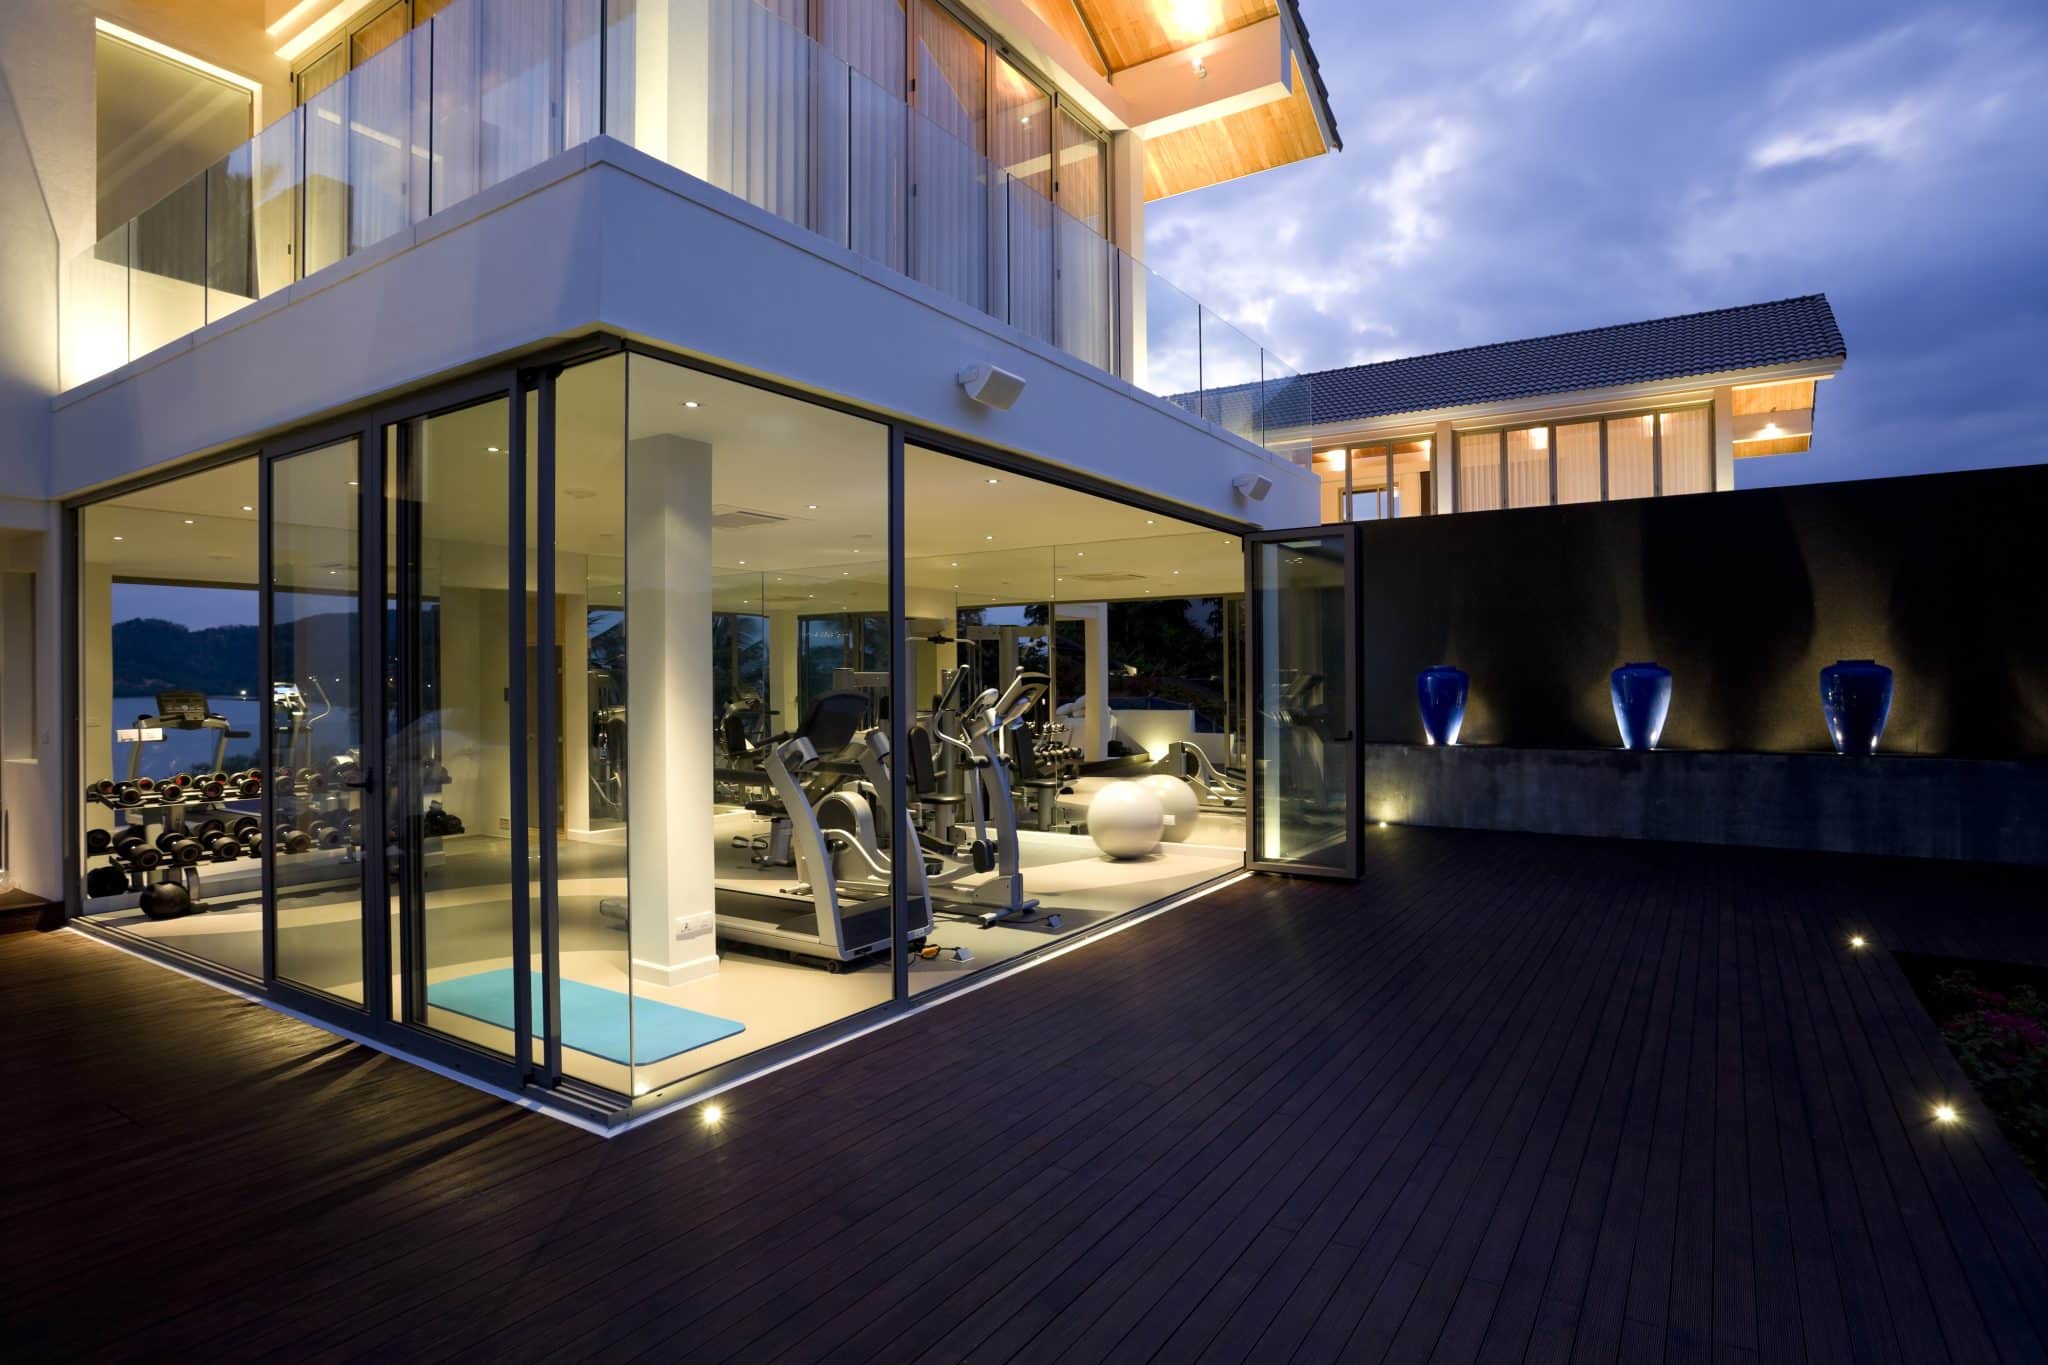 A luxury home gym design featuring outdoor views, access to a pool, high-end gym equipment, and other custom home elements.